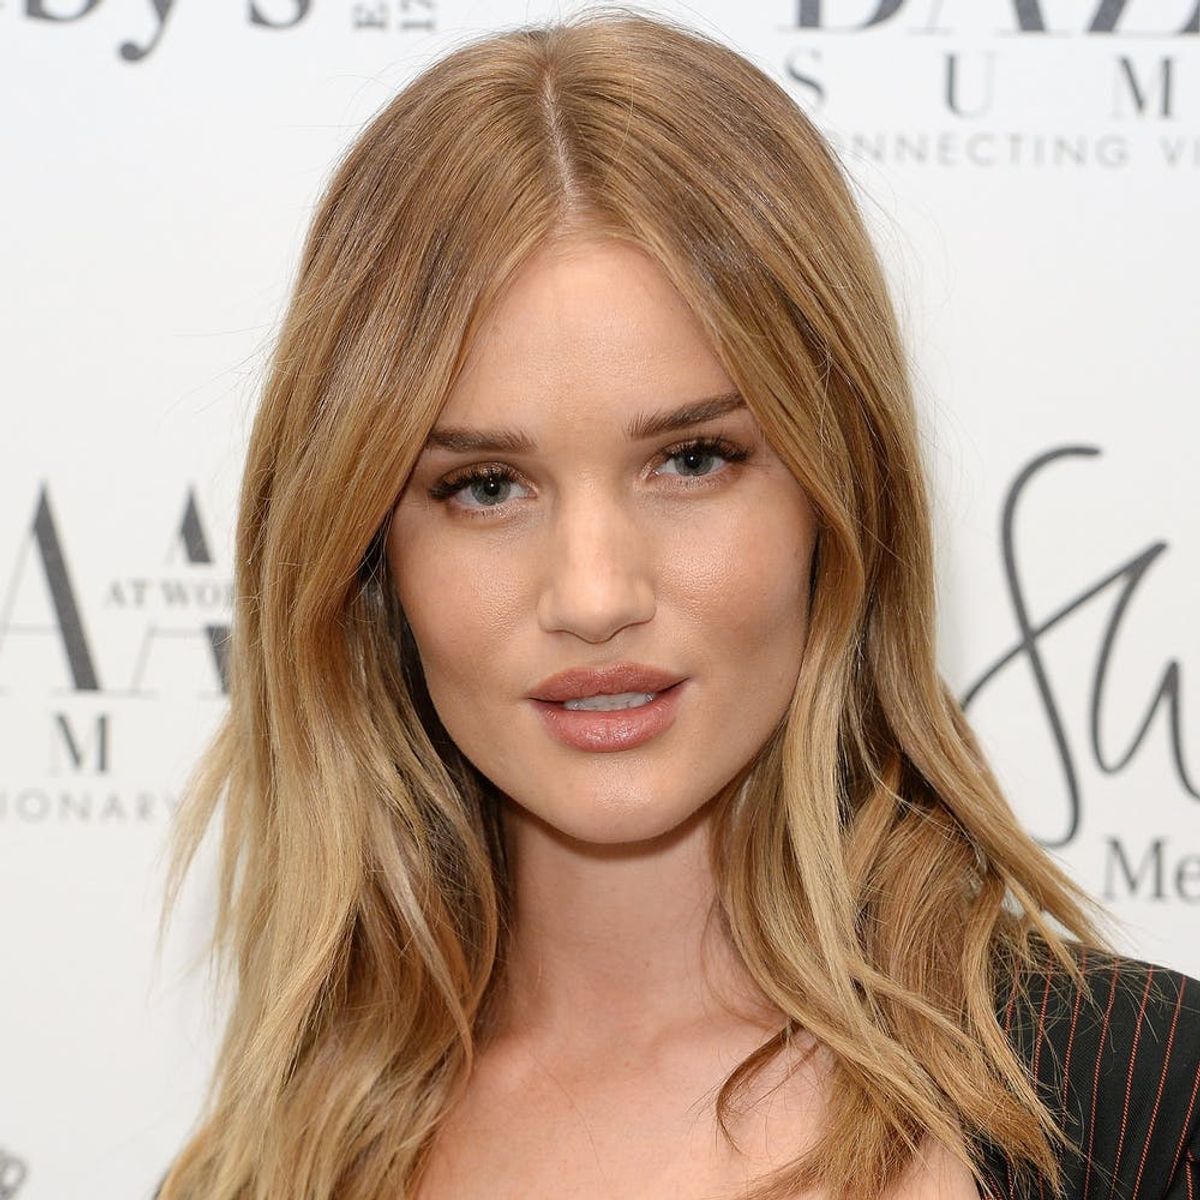 Rosie Huntington-Whiteley Shares a Rare Pic With New Baby Jack